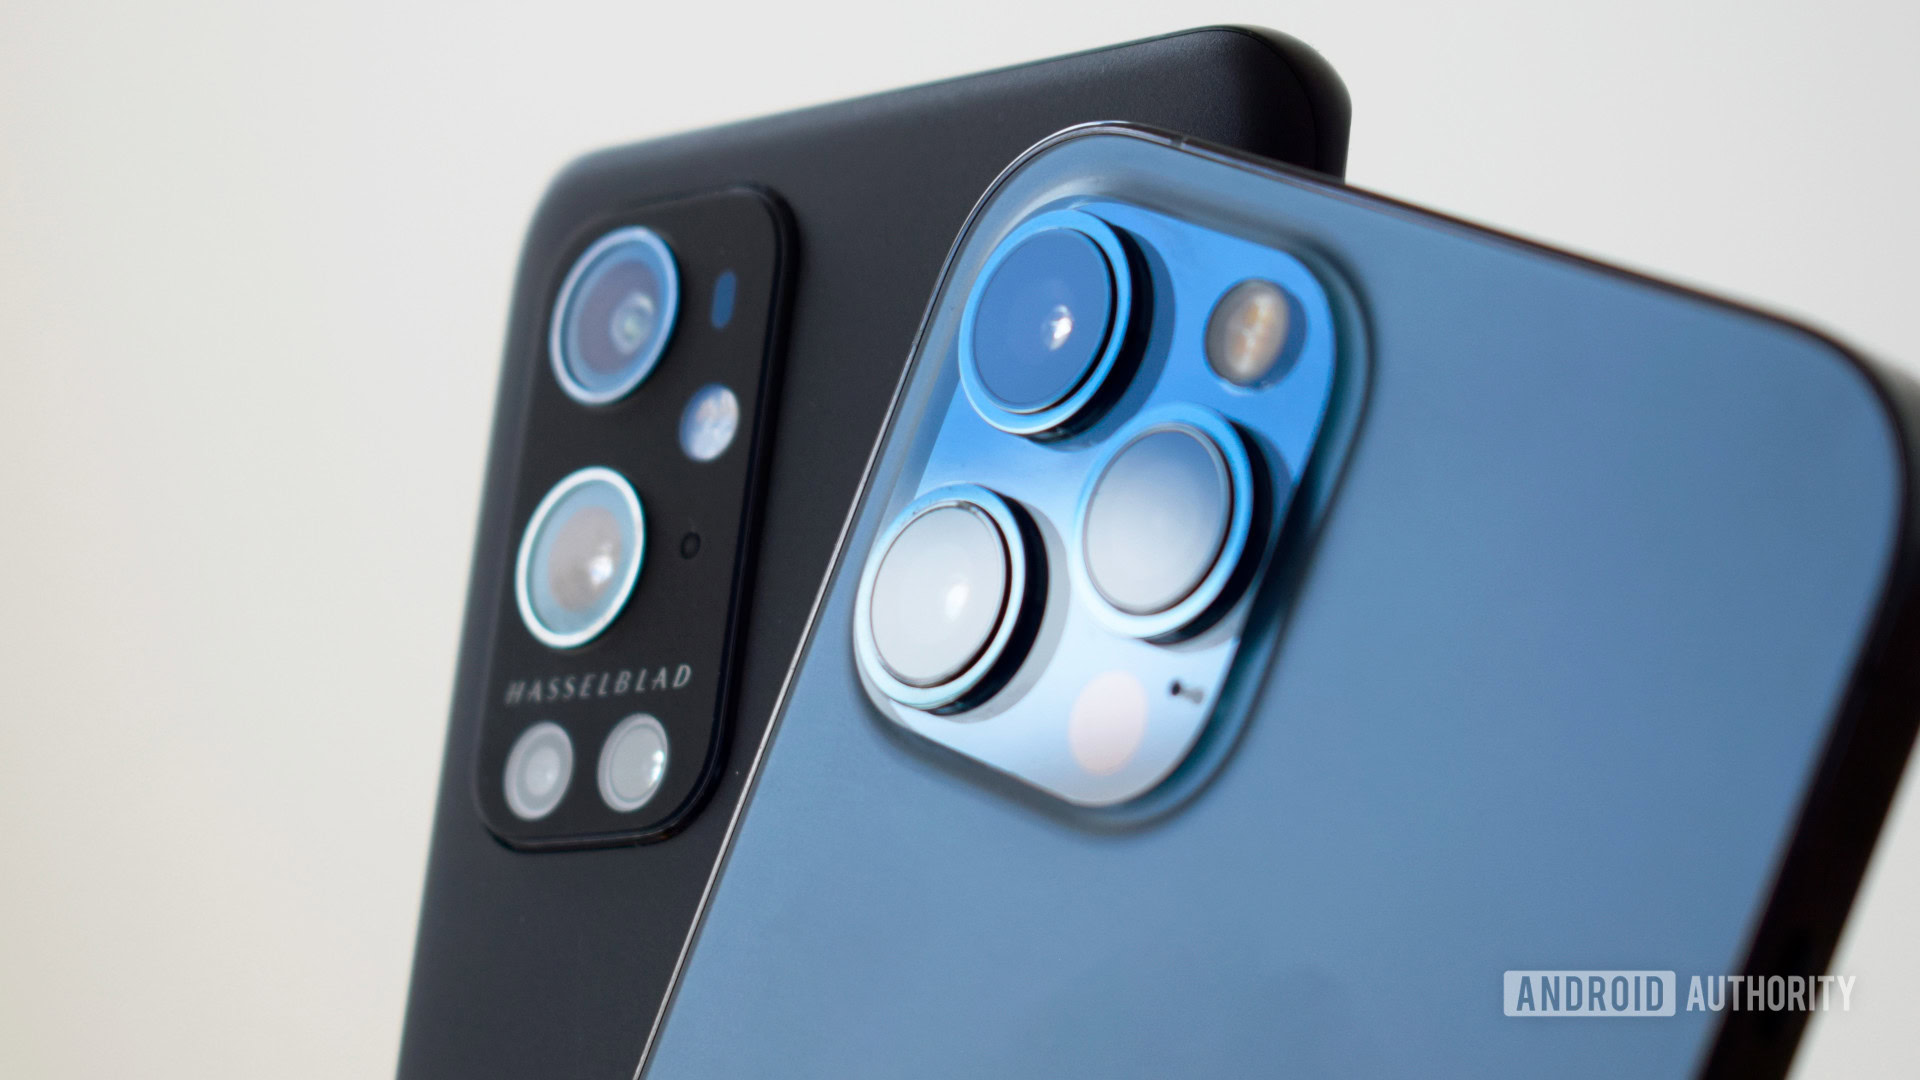 Is The iPhone 12 Pro Worth It? For Budding Photographers, The